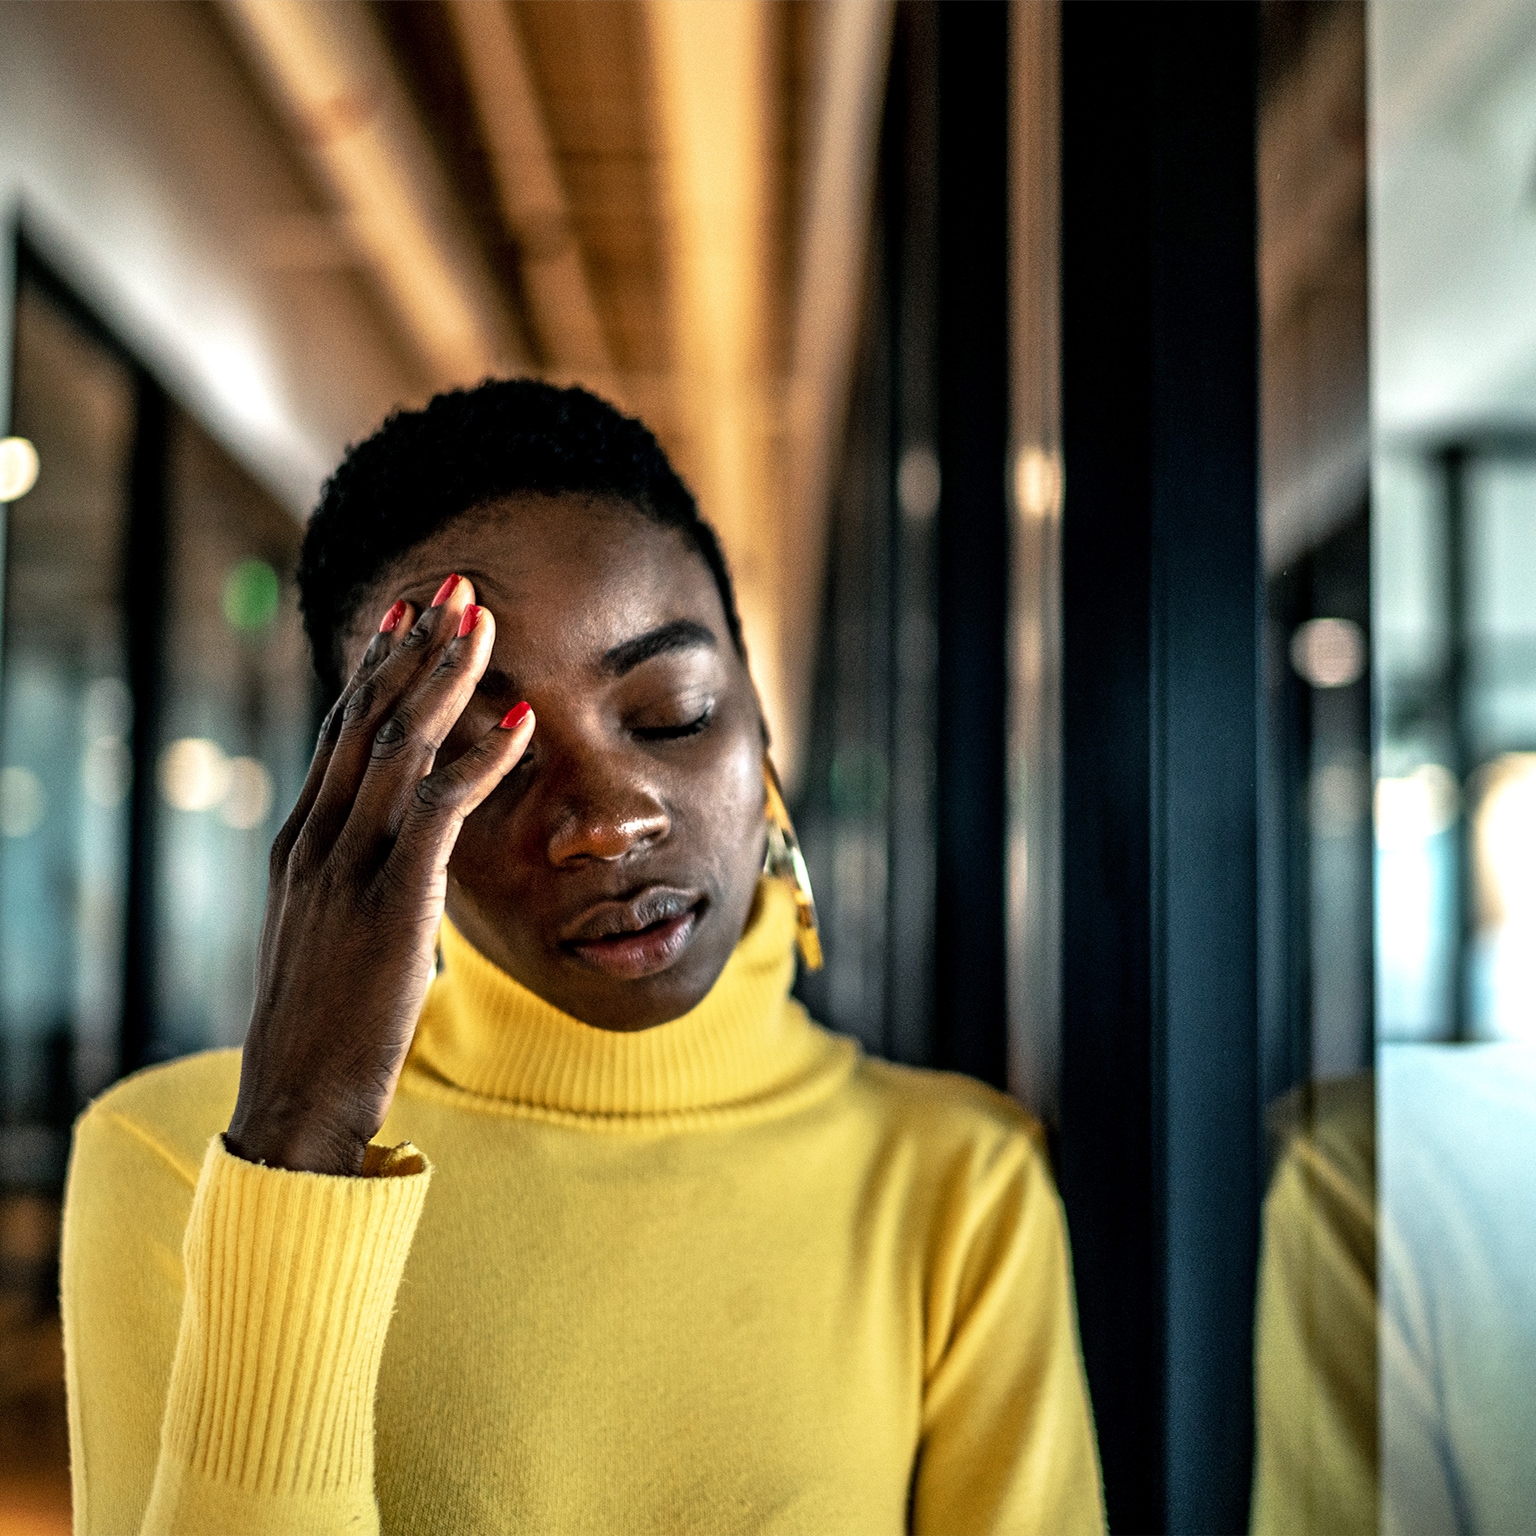 Image of a young Black woman looking stressed